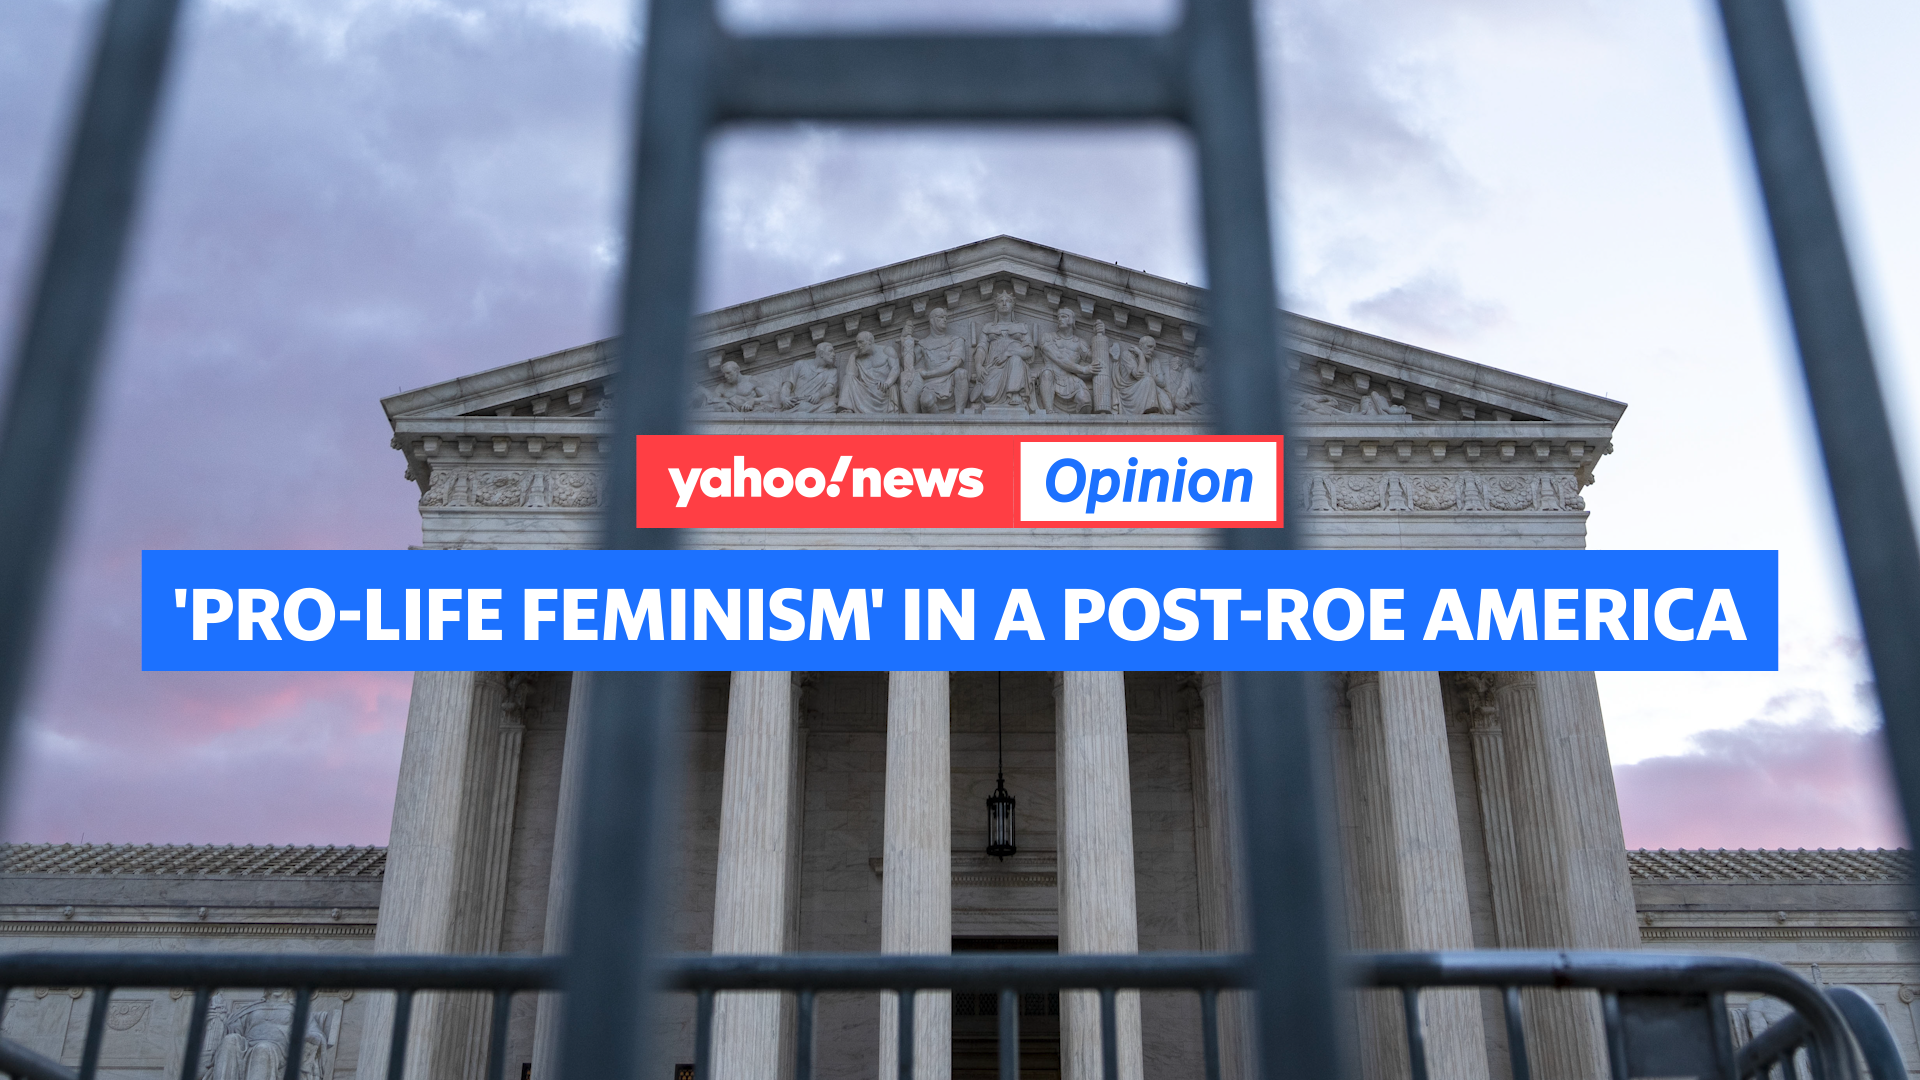 Roe is gone. Feminism is trending down. The Me Too backlash is here. - Vox